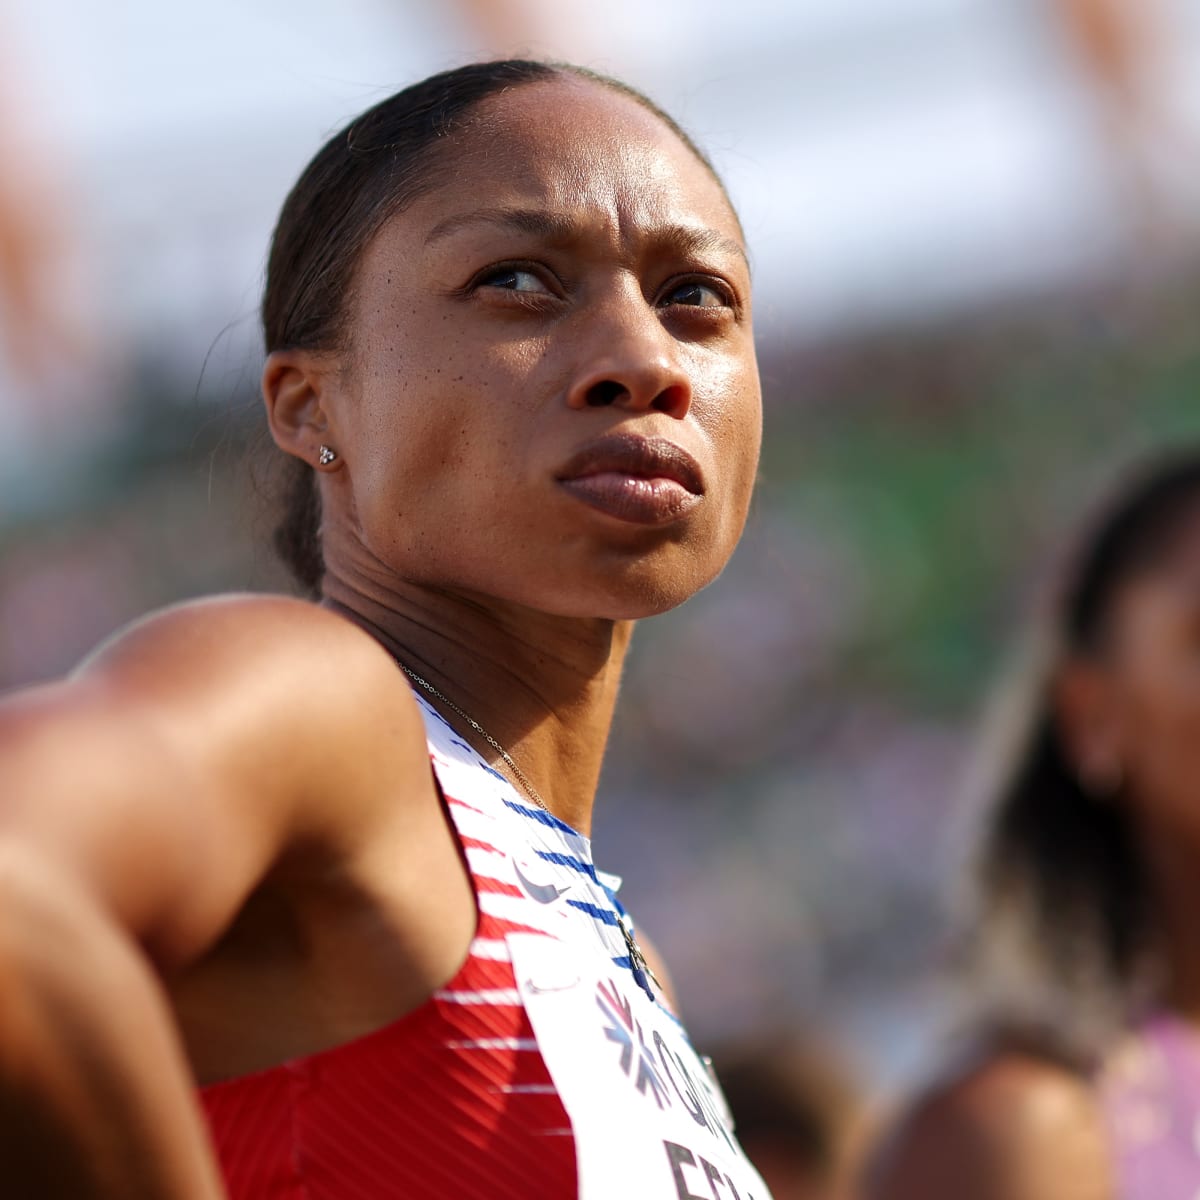 Olympian Allyson Felix Launches Her Own Shoe Company After Leaving Nike